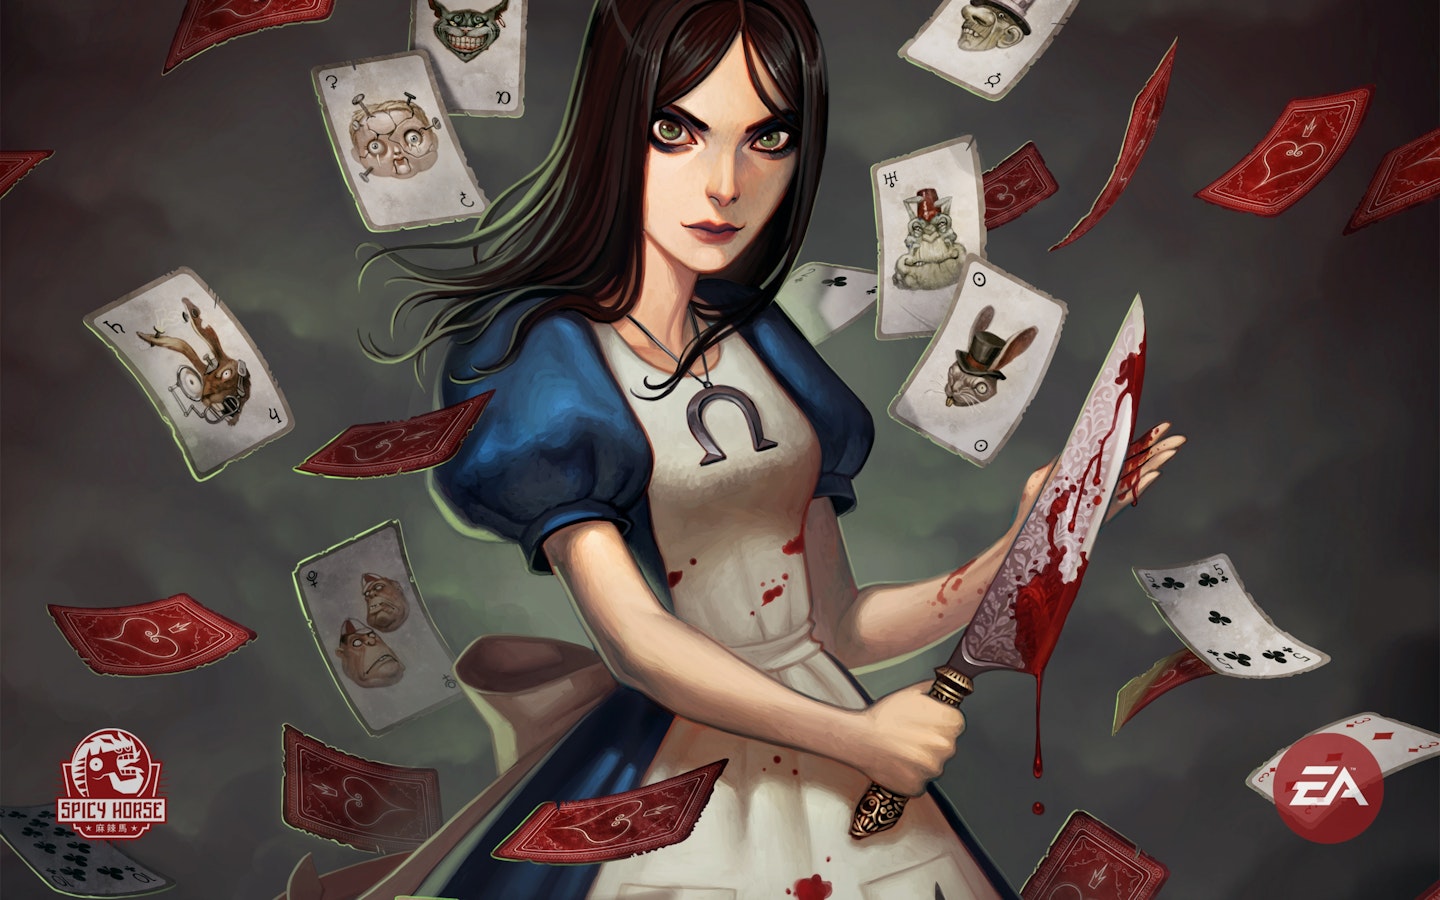 American McGee's Alice: The Madness Returns